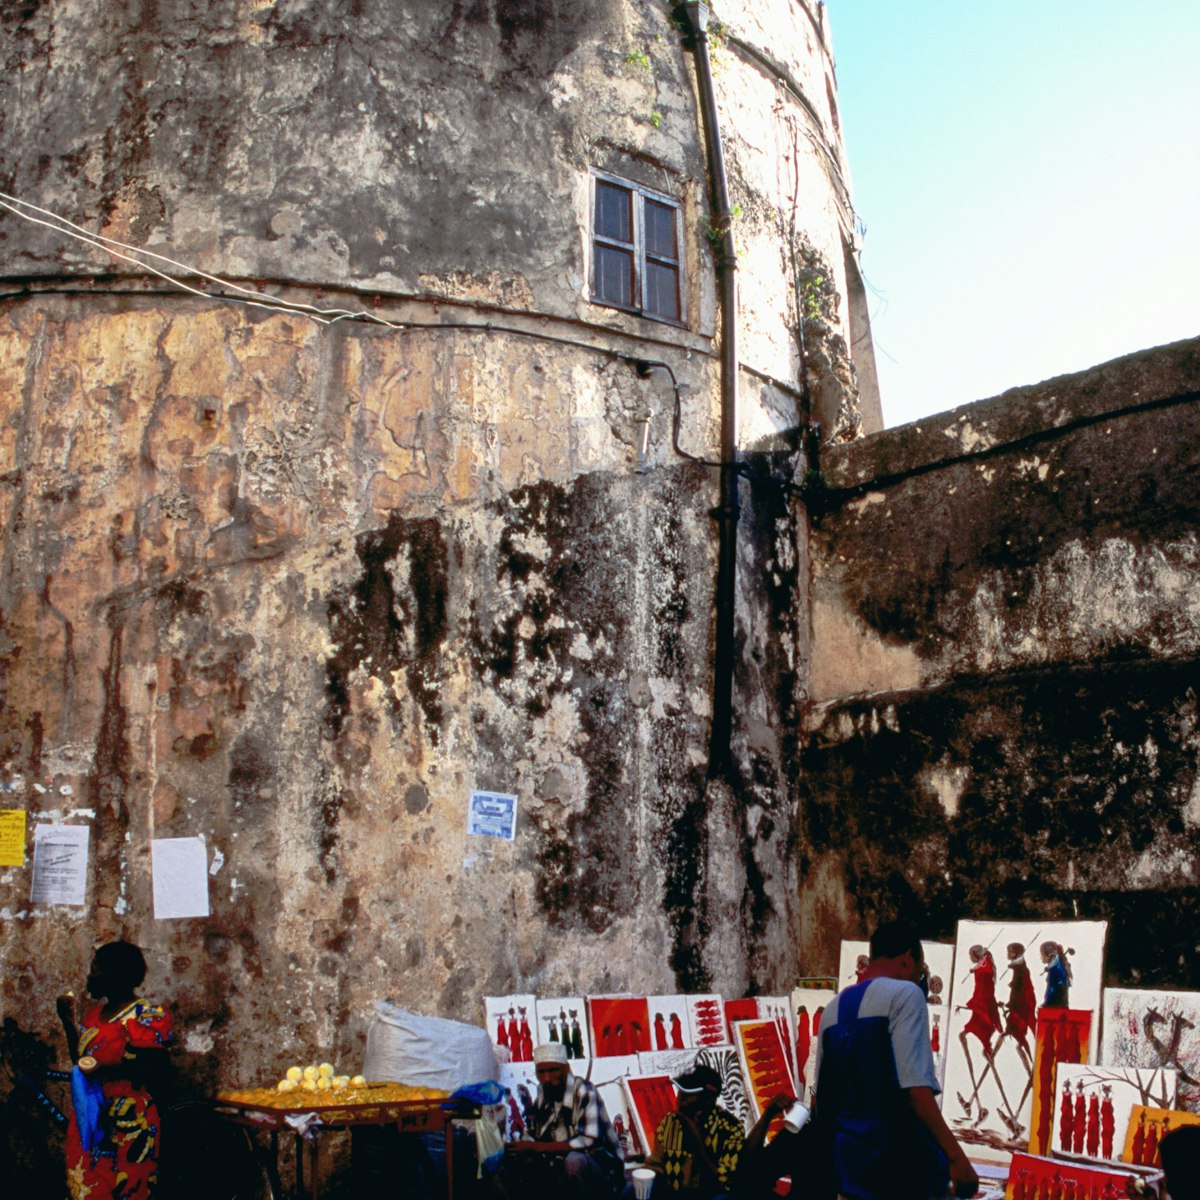 Paintings for sale outside Old Fort, Stone Town.